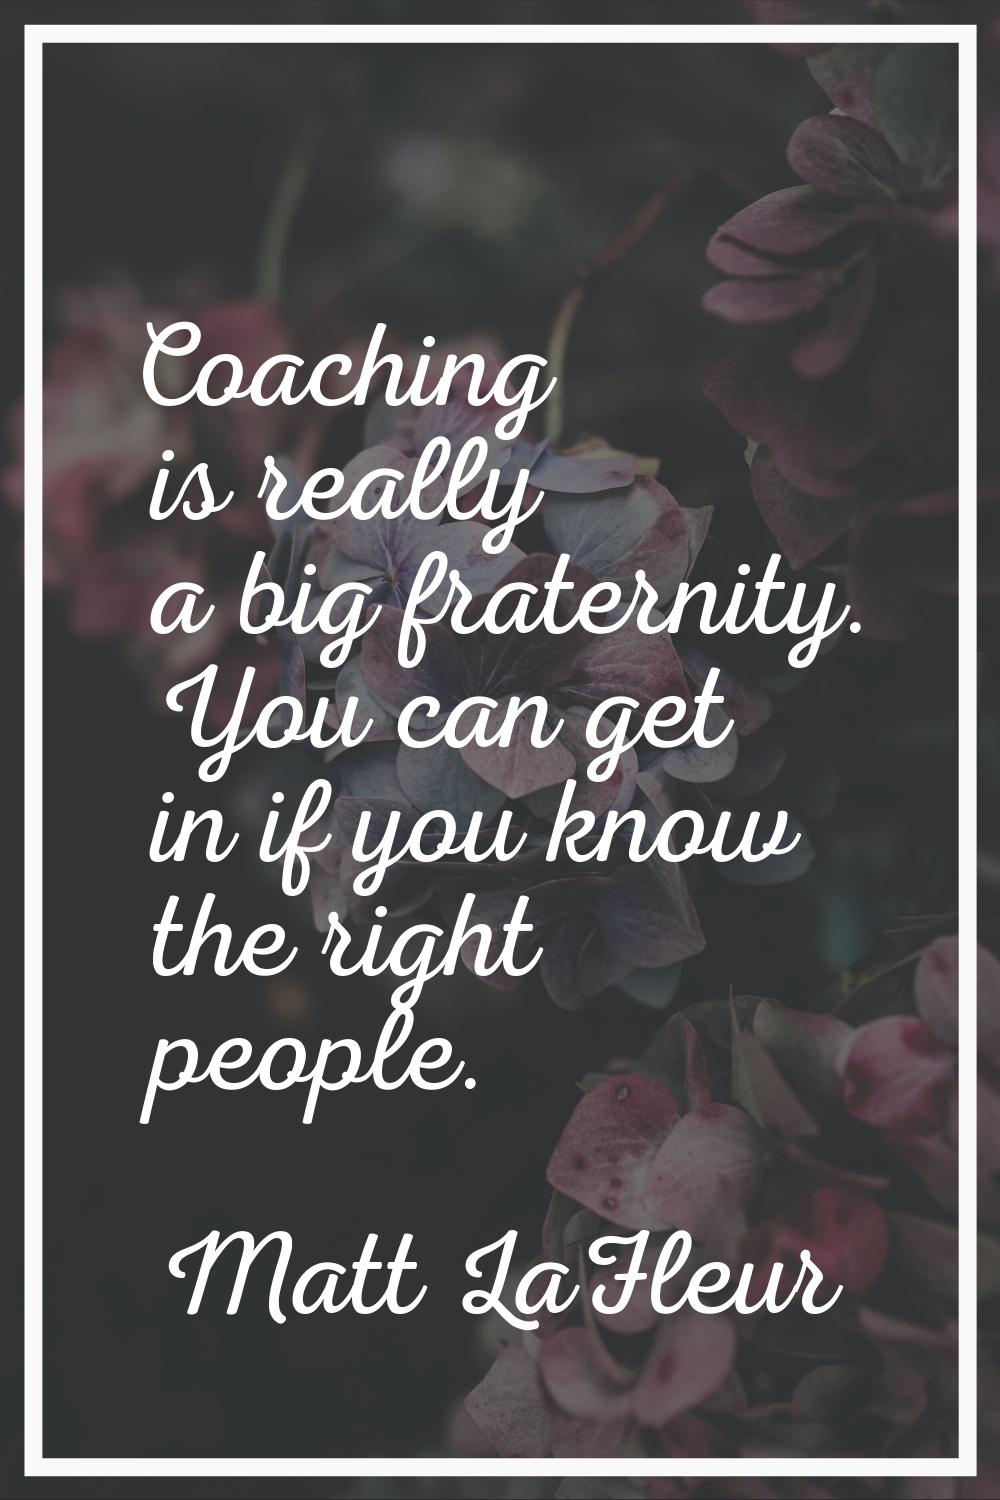 Coaching is really a big fraternity. You can get in if you know the right people.